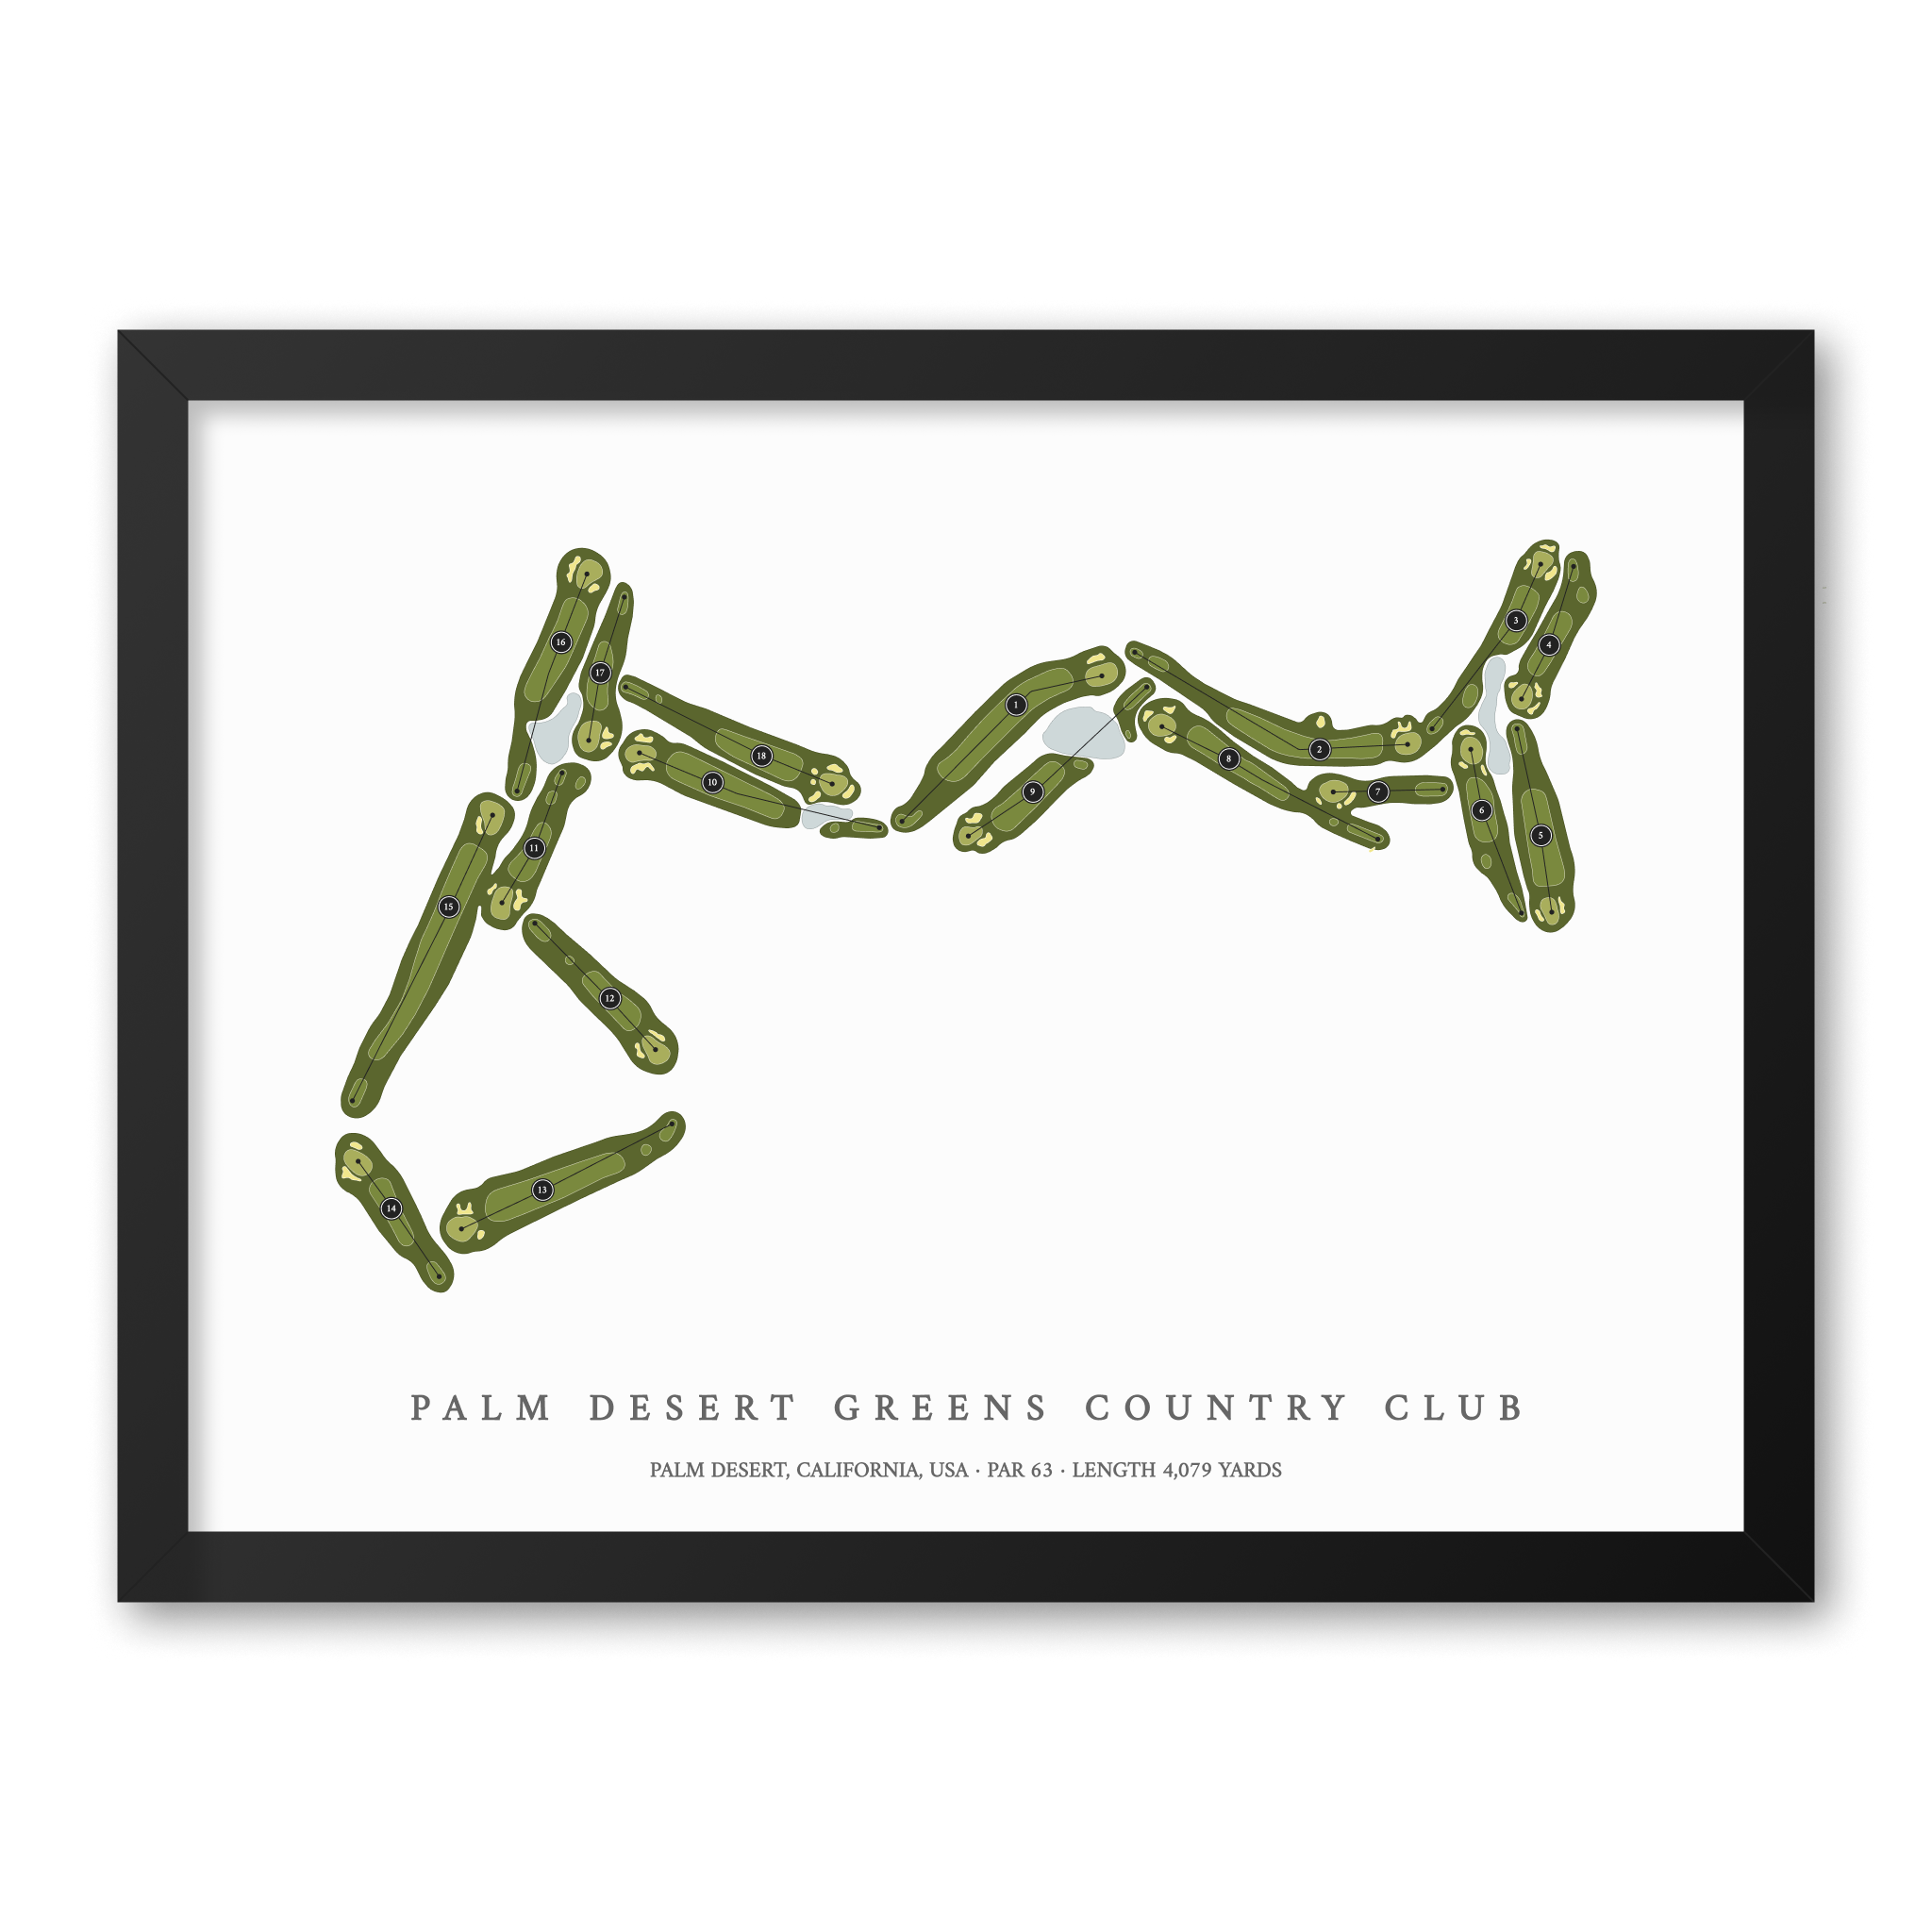 Palm Desert Greens Country Club | Heritage Style Golf Course Print | Black Frame